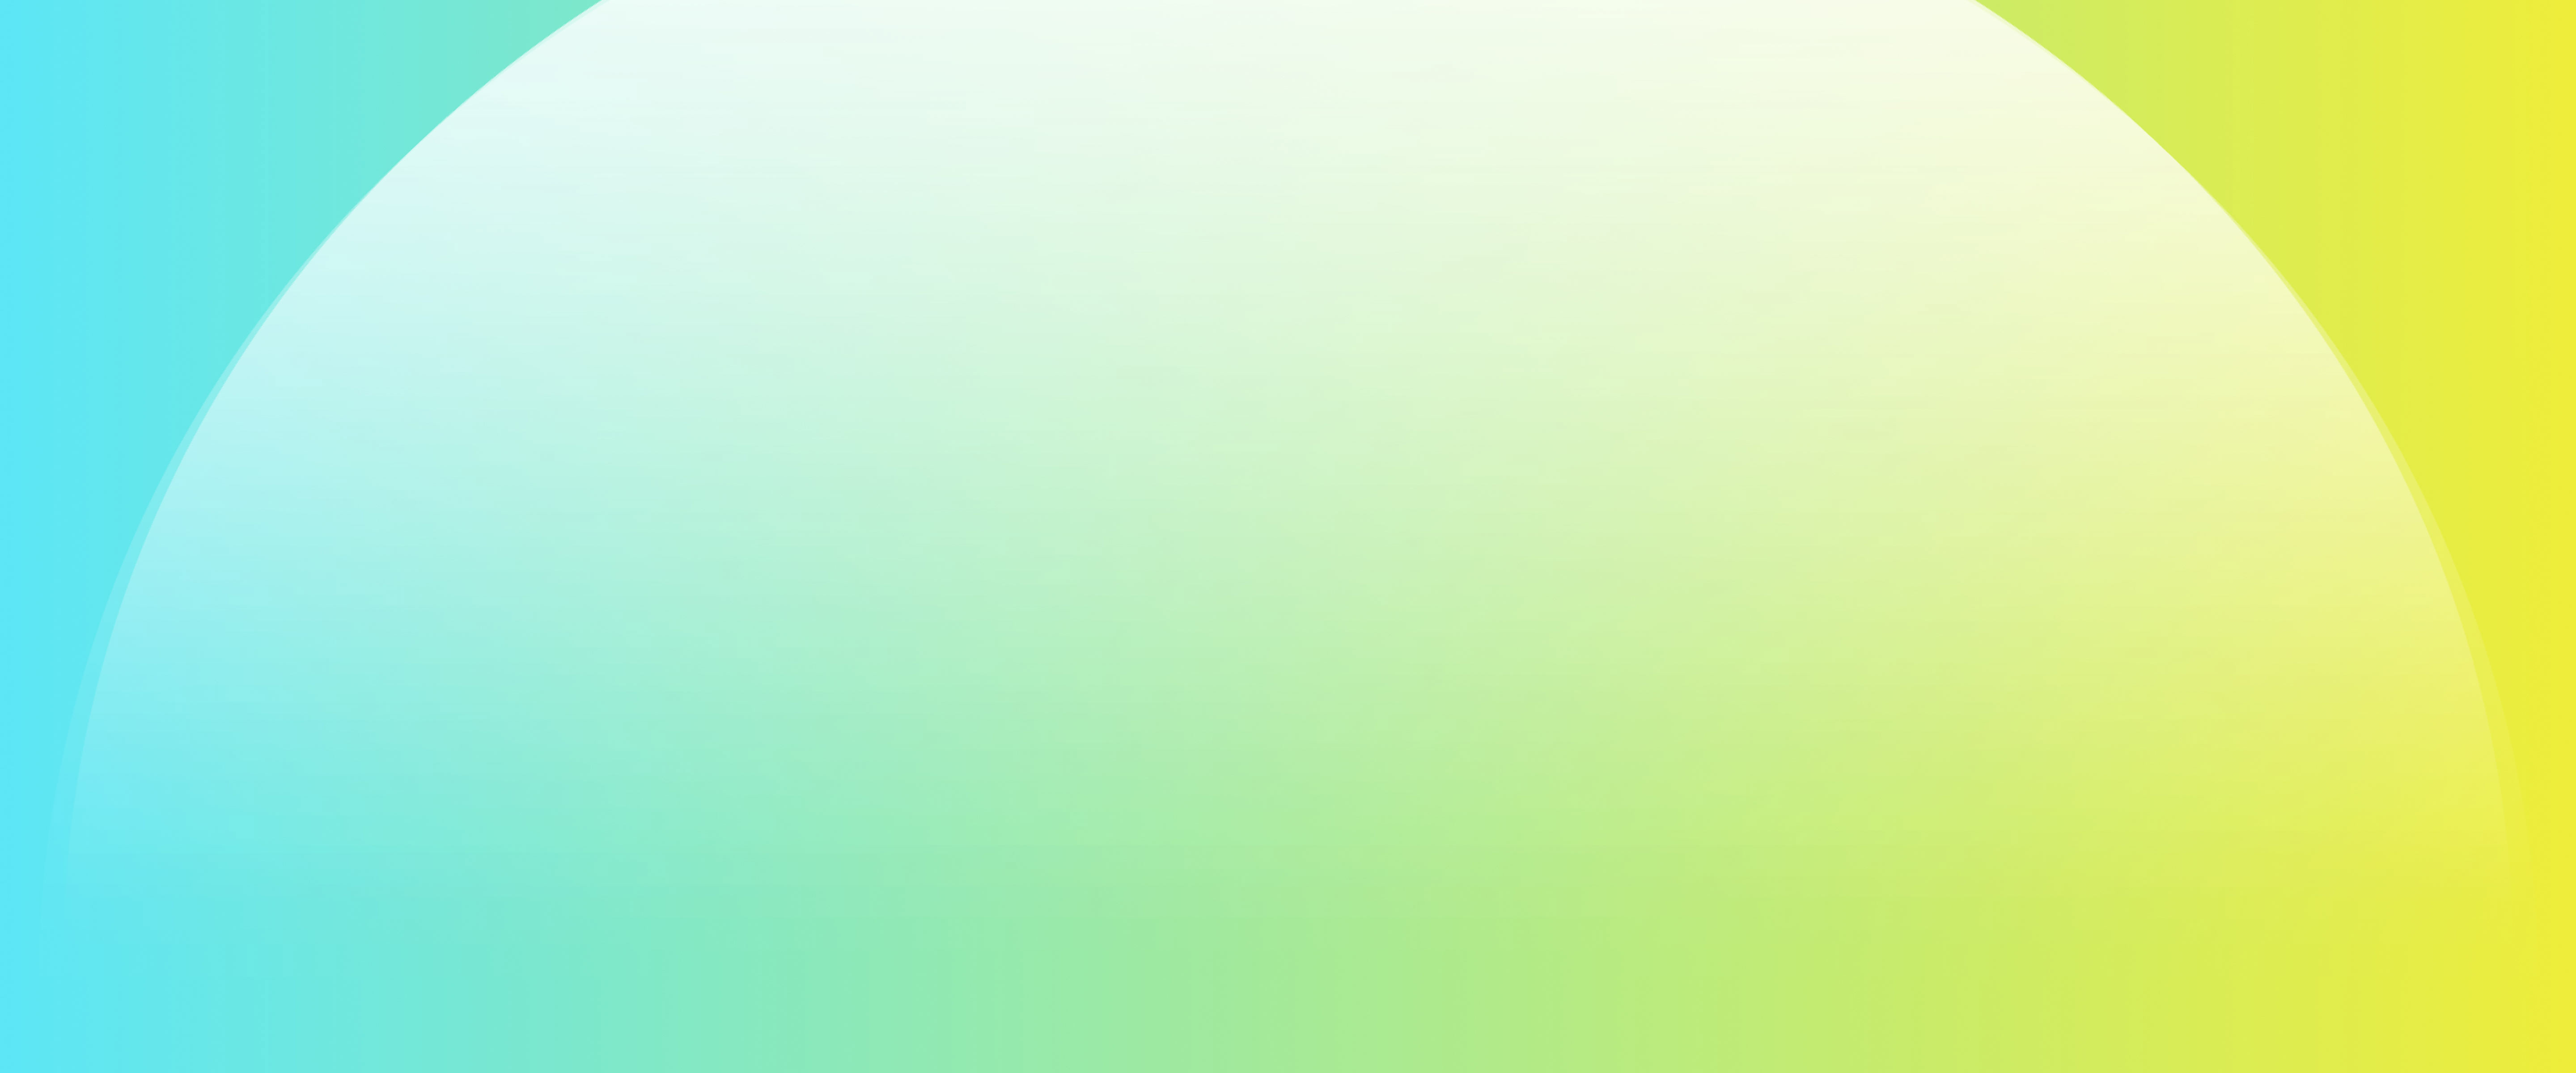 The background image consists of two colors, green and yellow